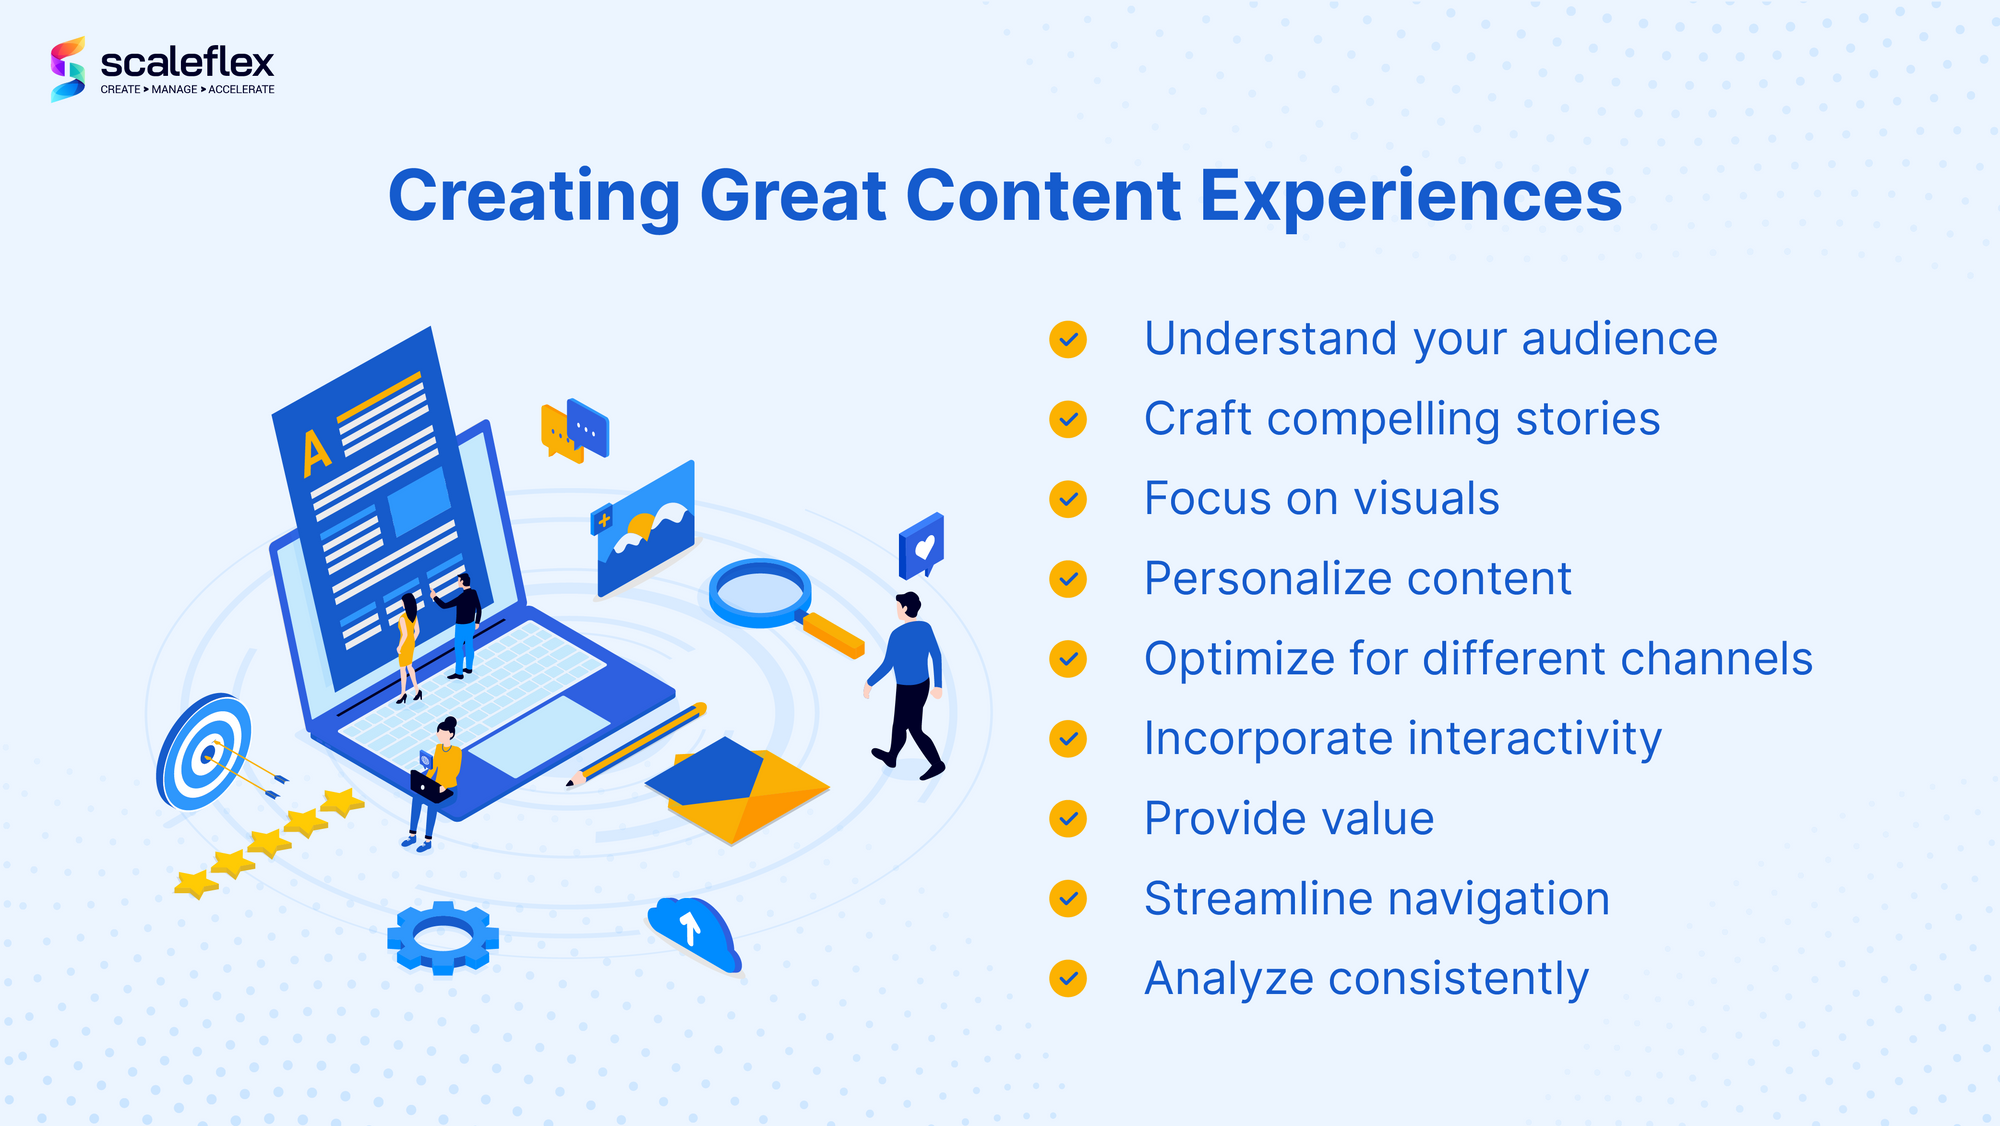 How to create great content experiences?